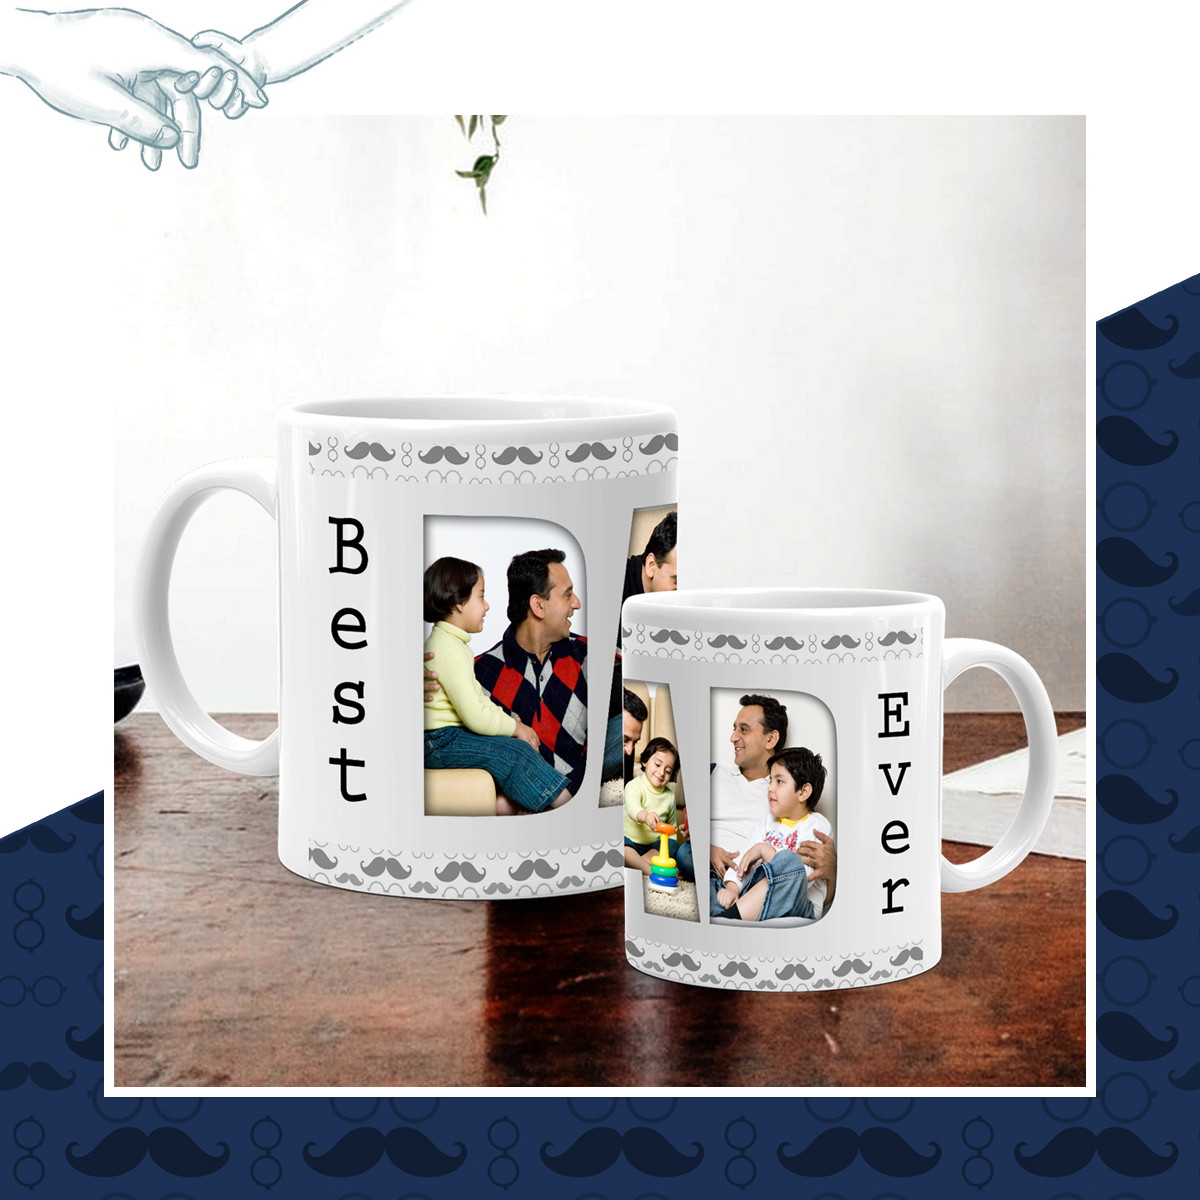 Buy Father's Day Gift, Personalized Gift, Father Gift, Personalized Gift  for Dad, Dad Birthday Gift for Dad, Photo Gift, Papa Gift, in 24 Hours  Online in India - Etsy